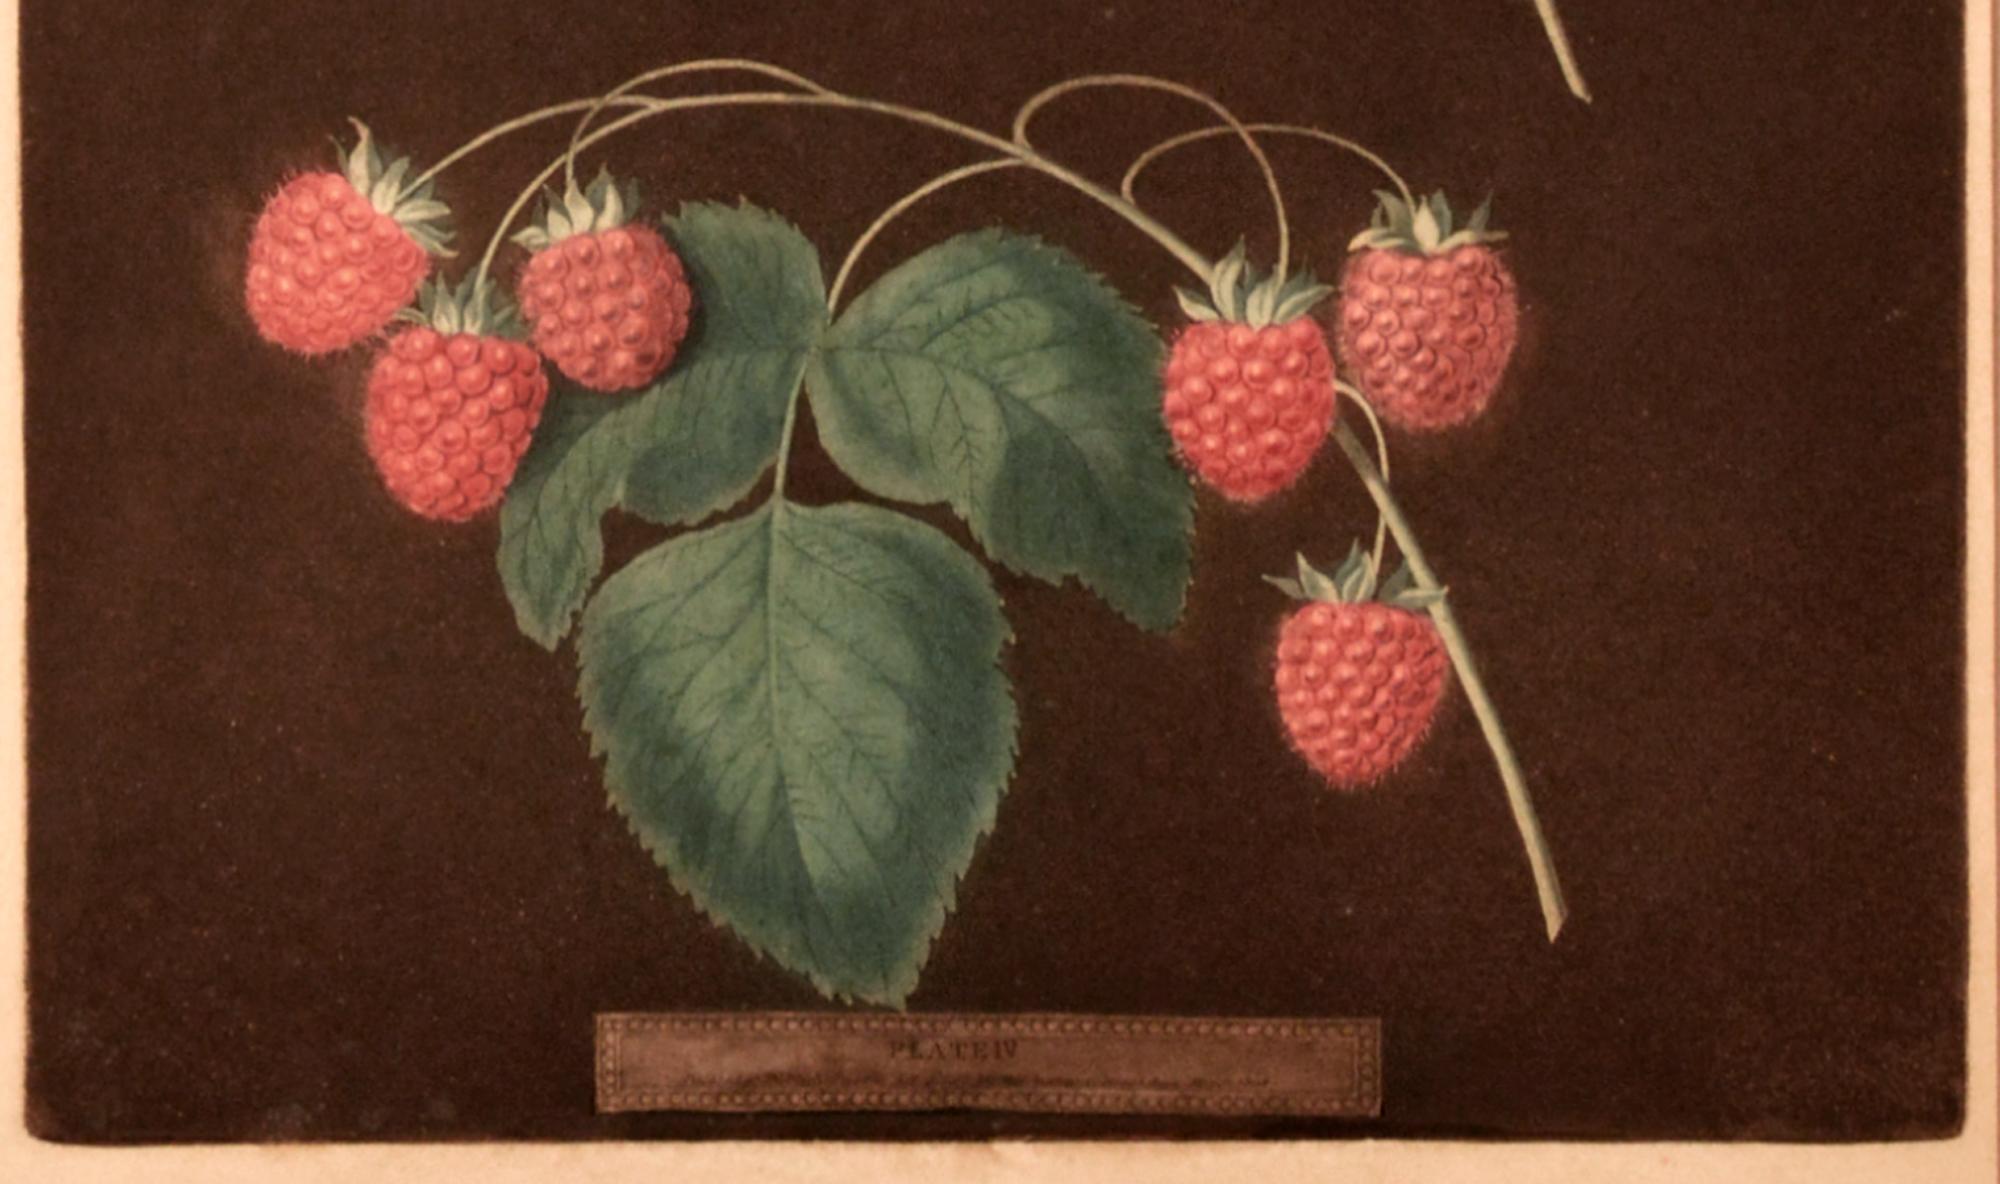 Georgian George Brookshaw Print of Two Varieties of Raspberries, One Yellow and One Red For Sale